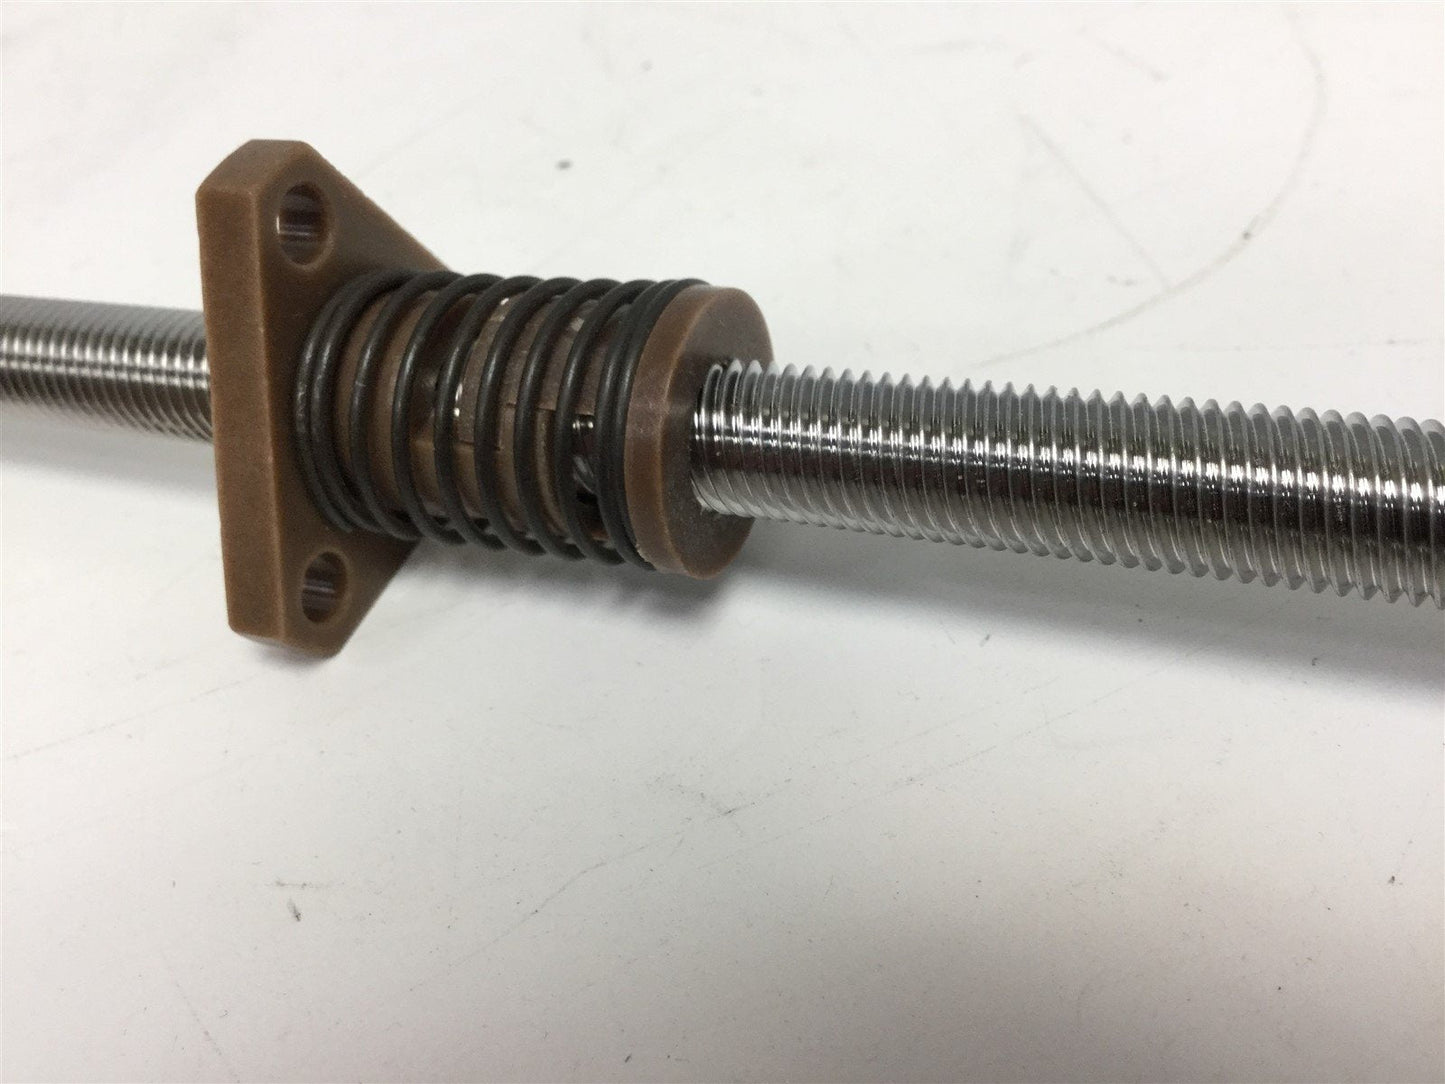 New Other Berg HTS6ABS2-24 Anti-Backlash Lead Screw, 5 Start Screw, DIA 10mm, Length 610mm